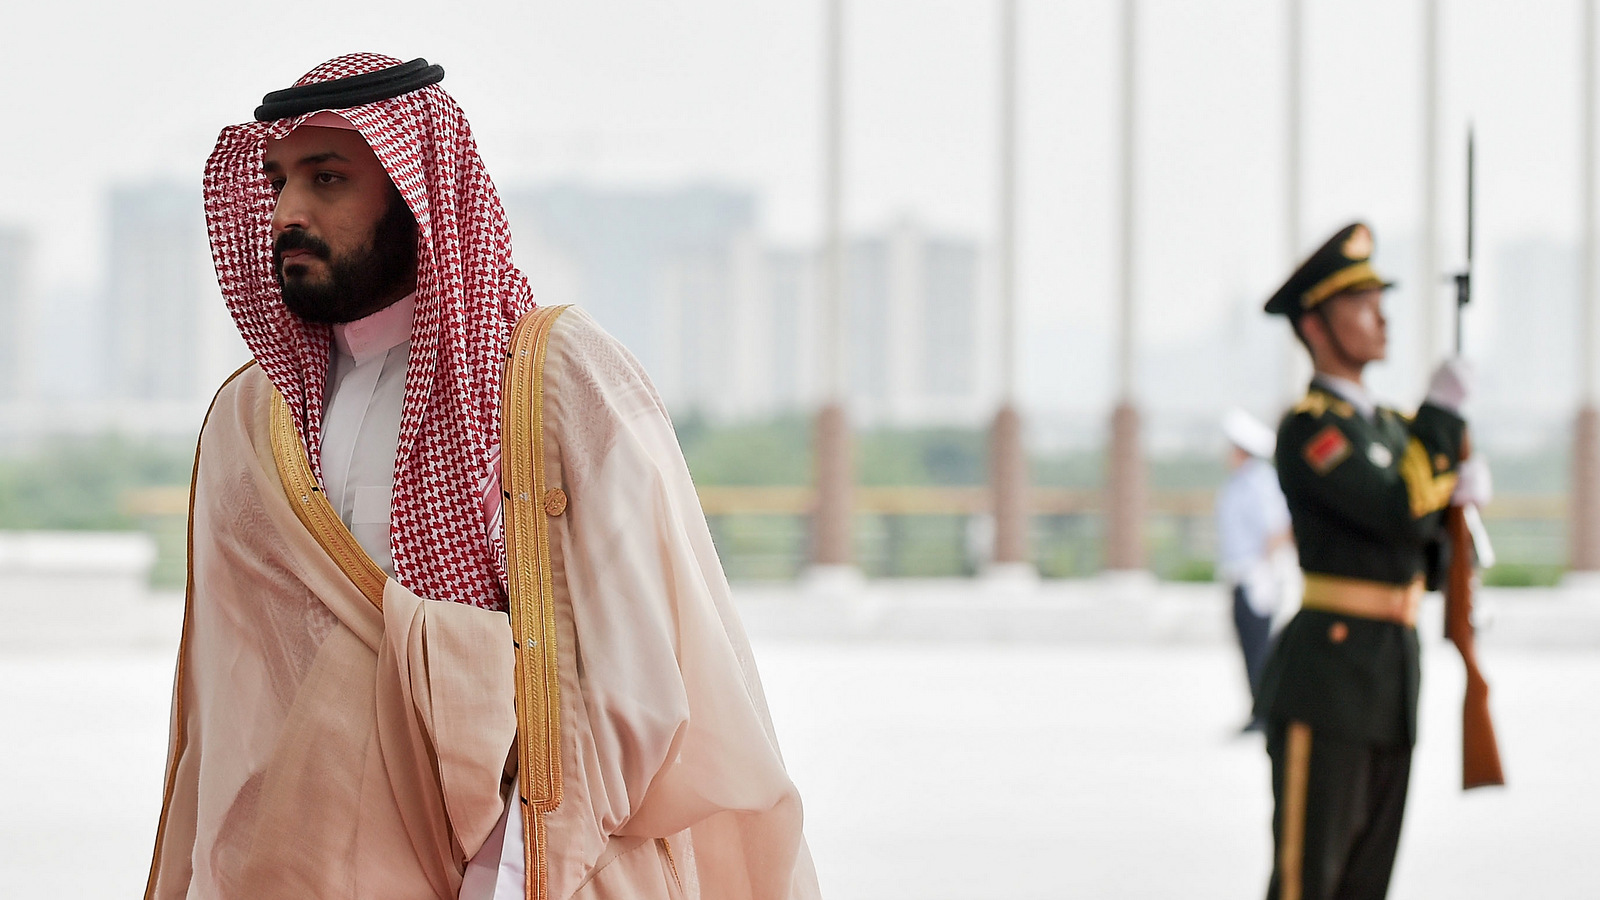 Saudi Arabia's Crown Prince Mohammed bin Salman arrives at the Hangzhou Exhibition Center to participate in G20 Summit, Sept. 4, 2016 in Hangzhou, China. (Etienne Oliveau/AP)